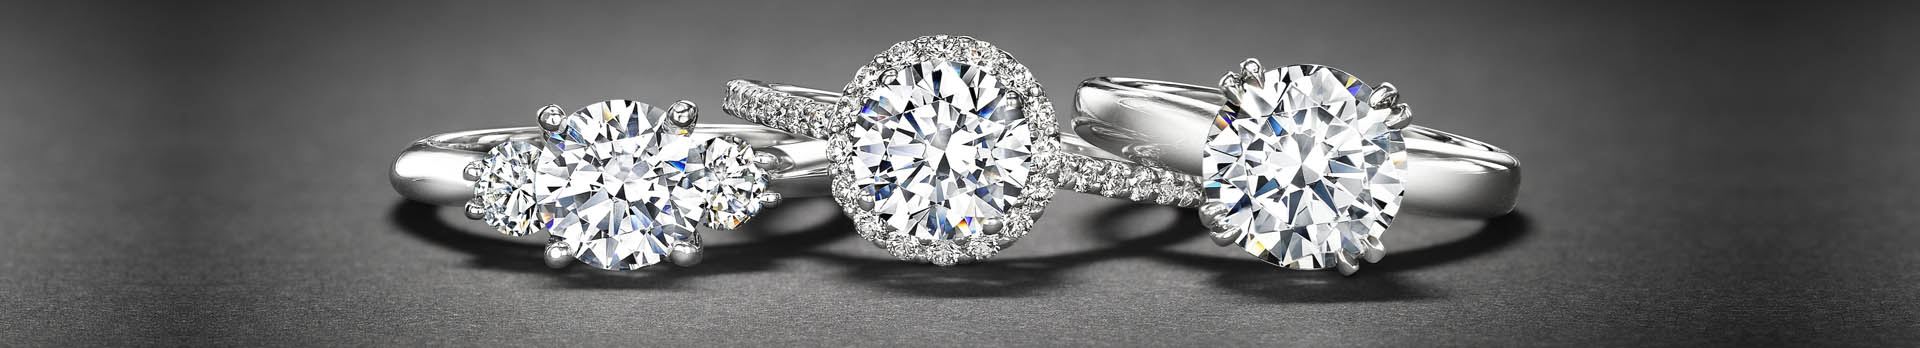 Visual Brilliance by GemEx System at Arthur's Jewelers. Arthur's Jewelers